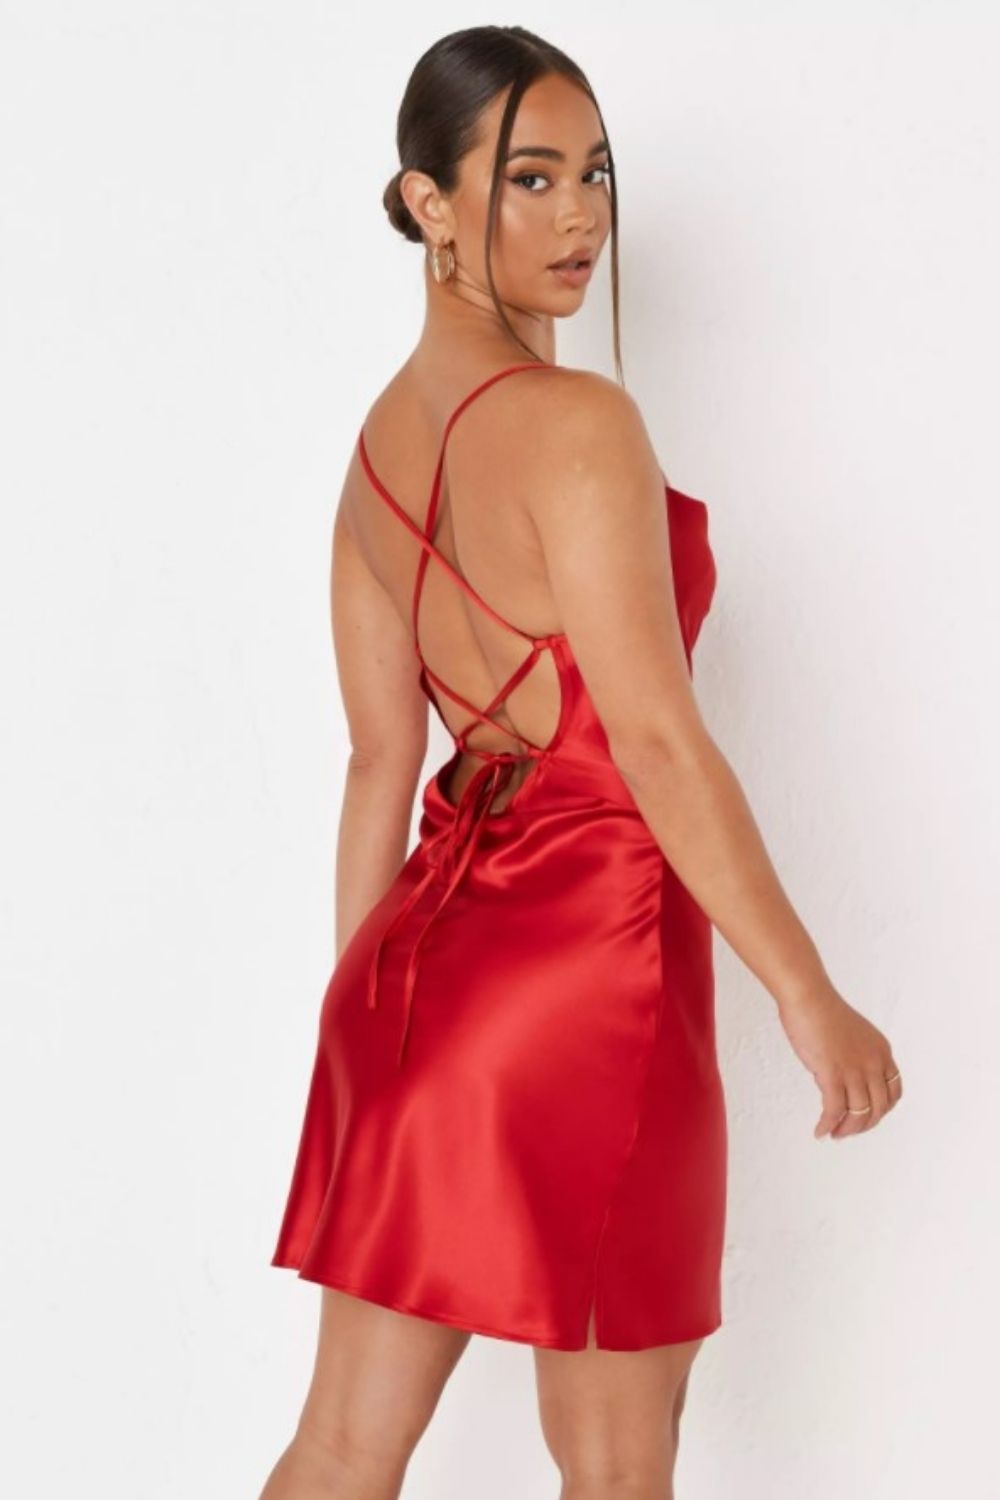 Women's Red Dresses | Explore our New Arrivals | ZARA United States